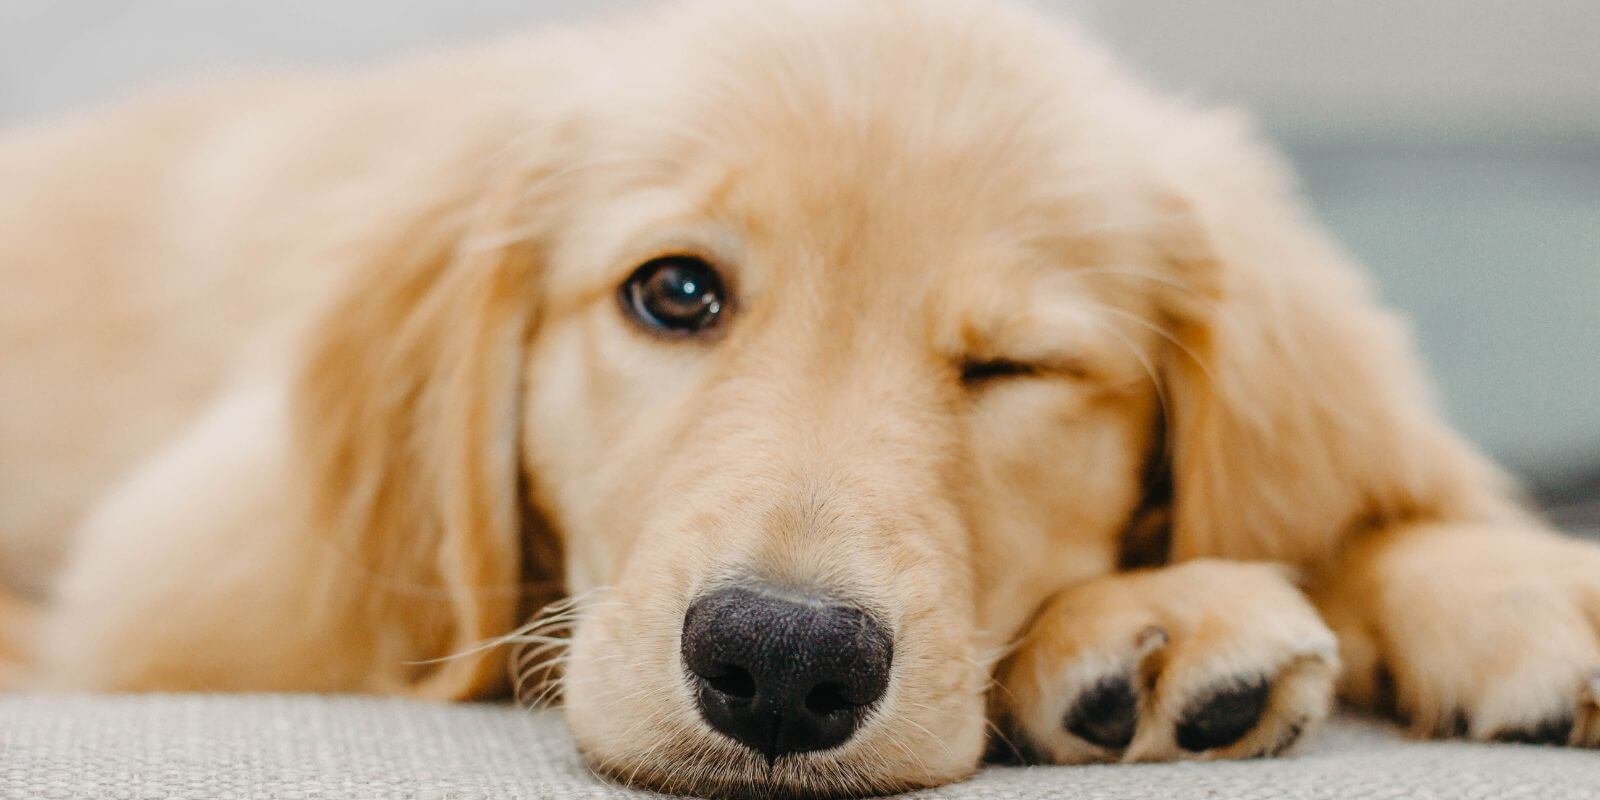 Golden Retriever puppy laying on its paws with one eye open